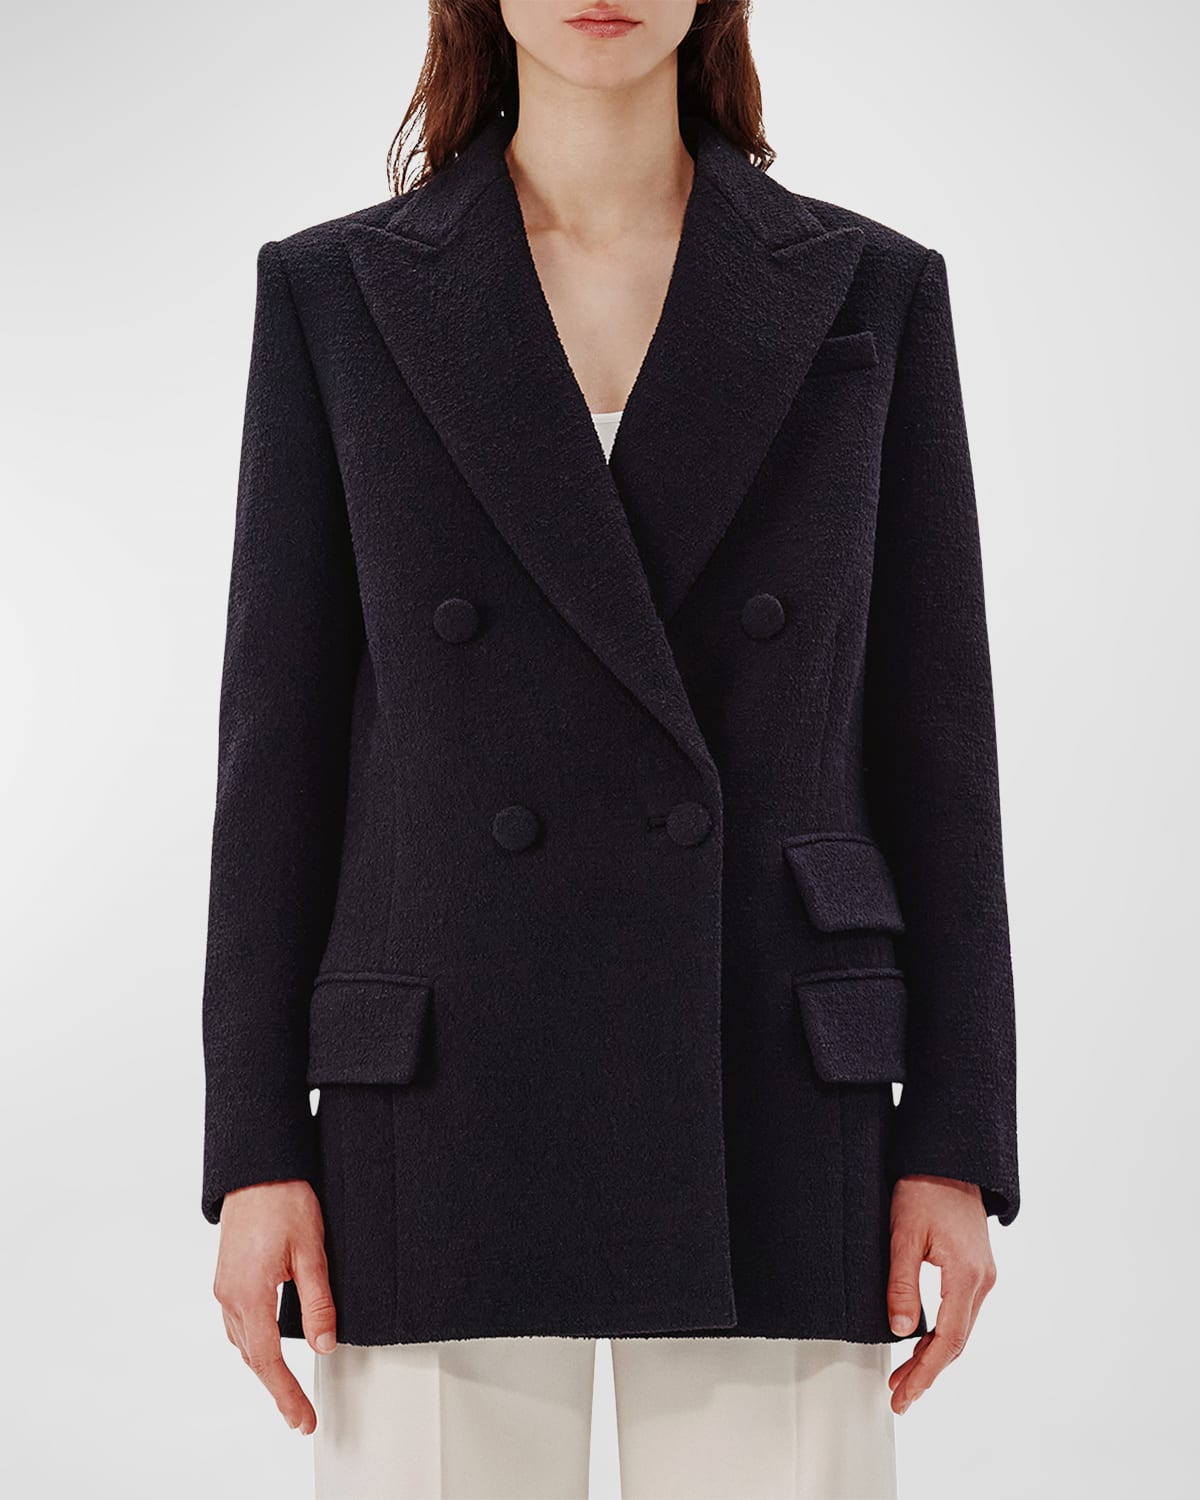 Another Tomorrow Boucle Blazer Coat With Side Zippers In Black